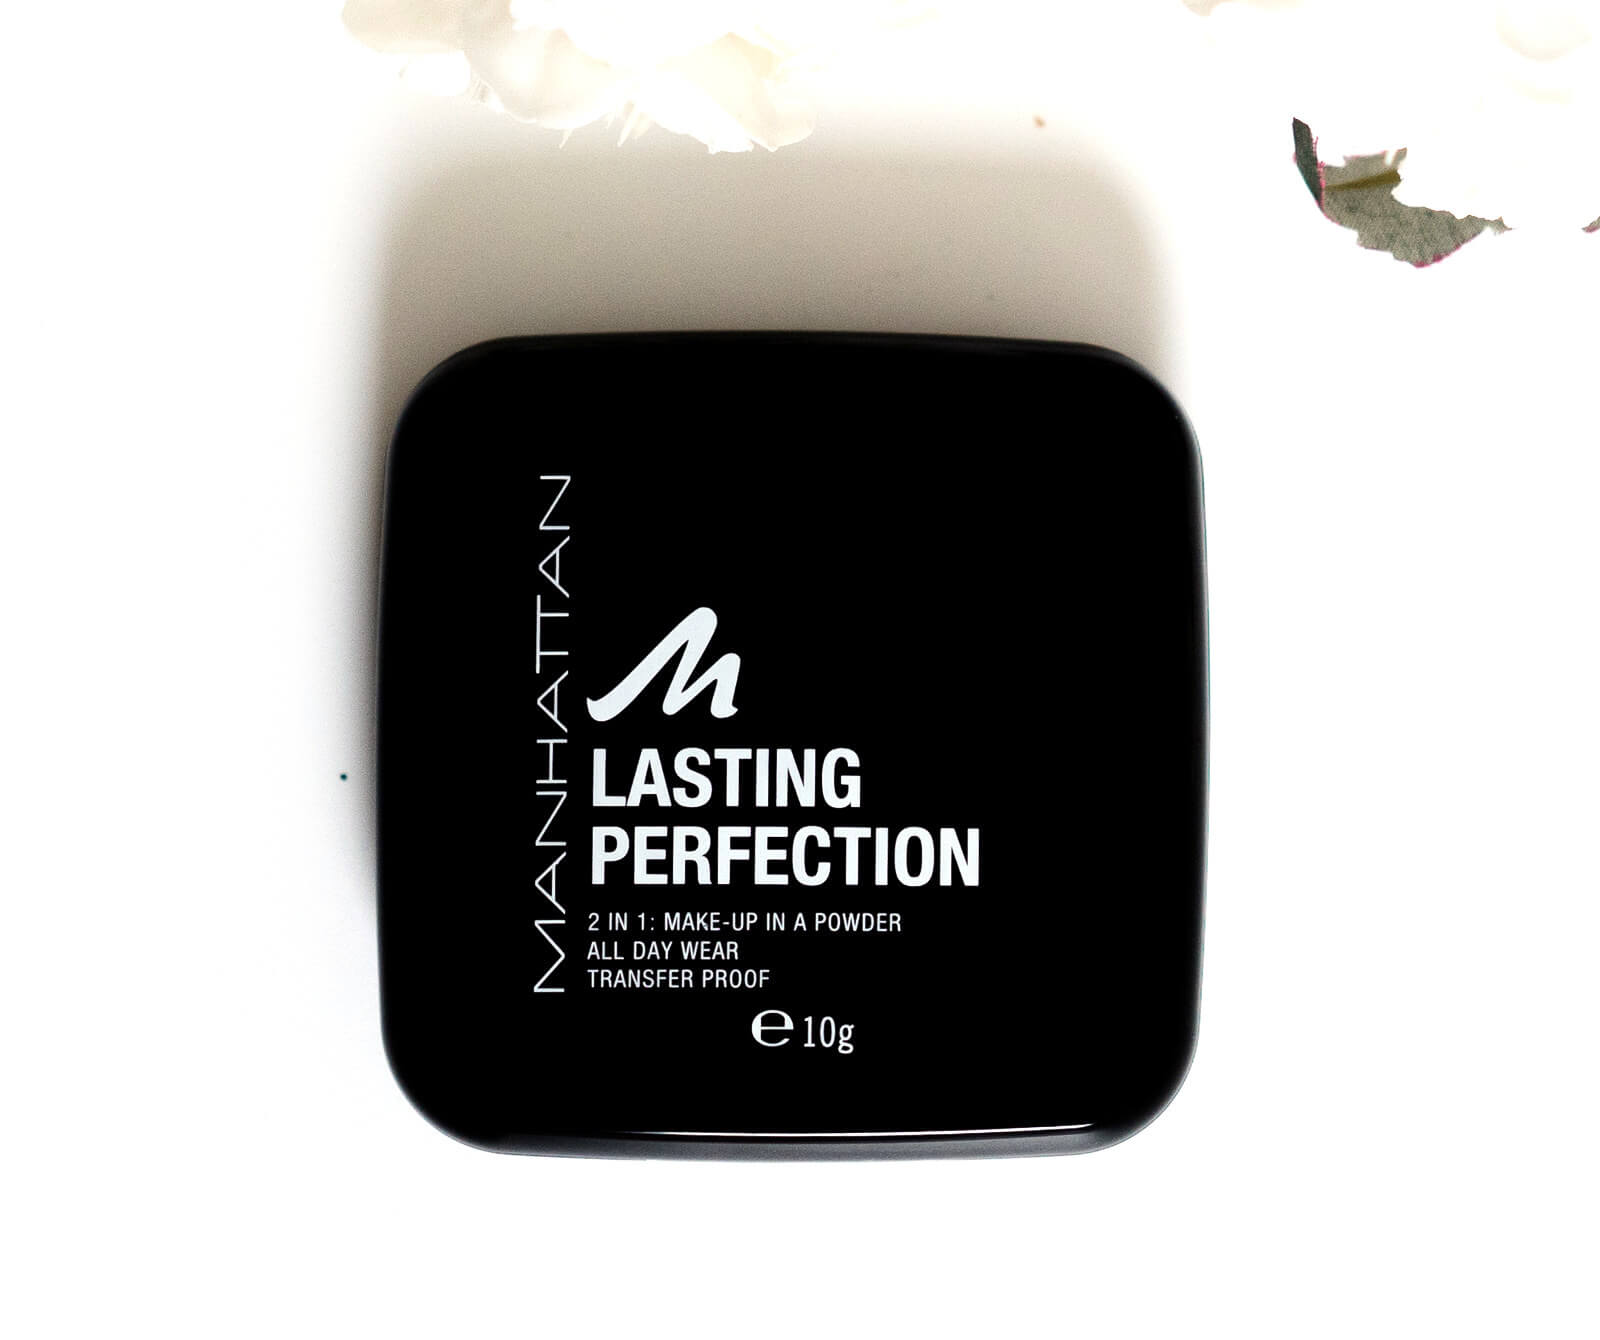 Review - Manhattan Lasting Perfection Compact Puder Make-up im Test 2